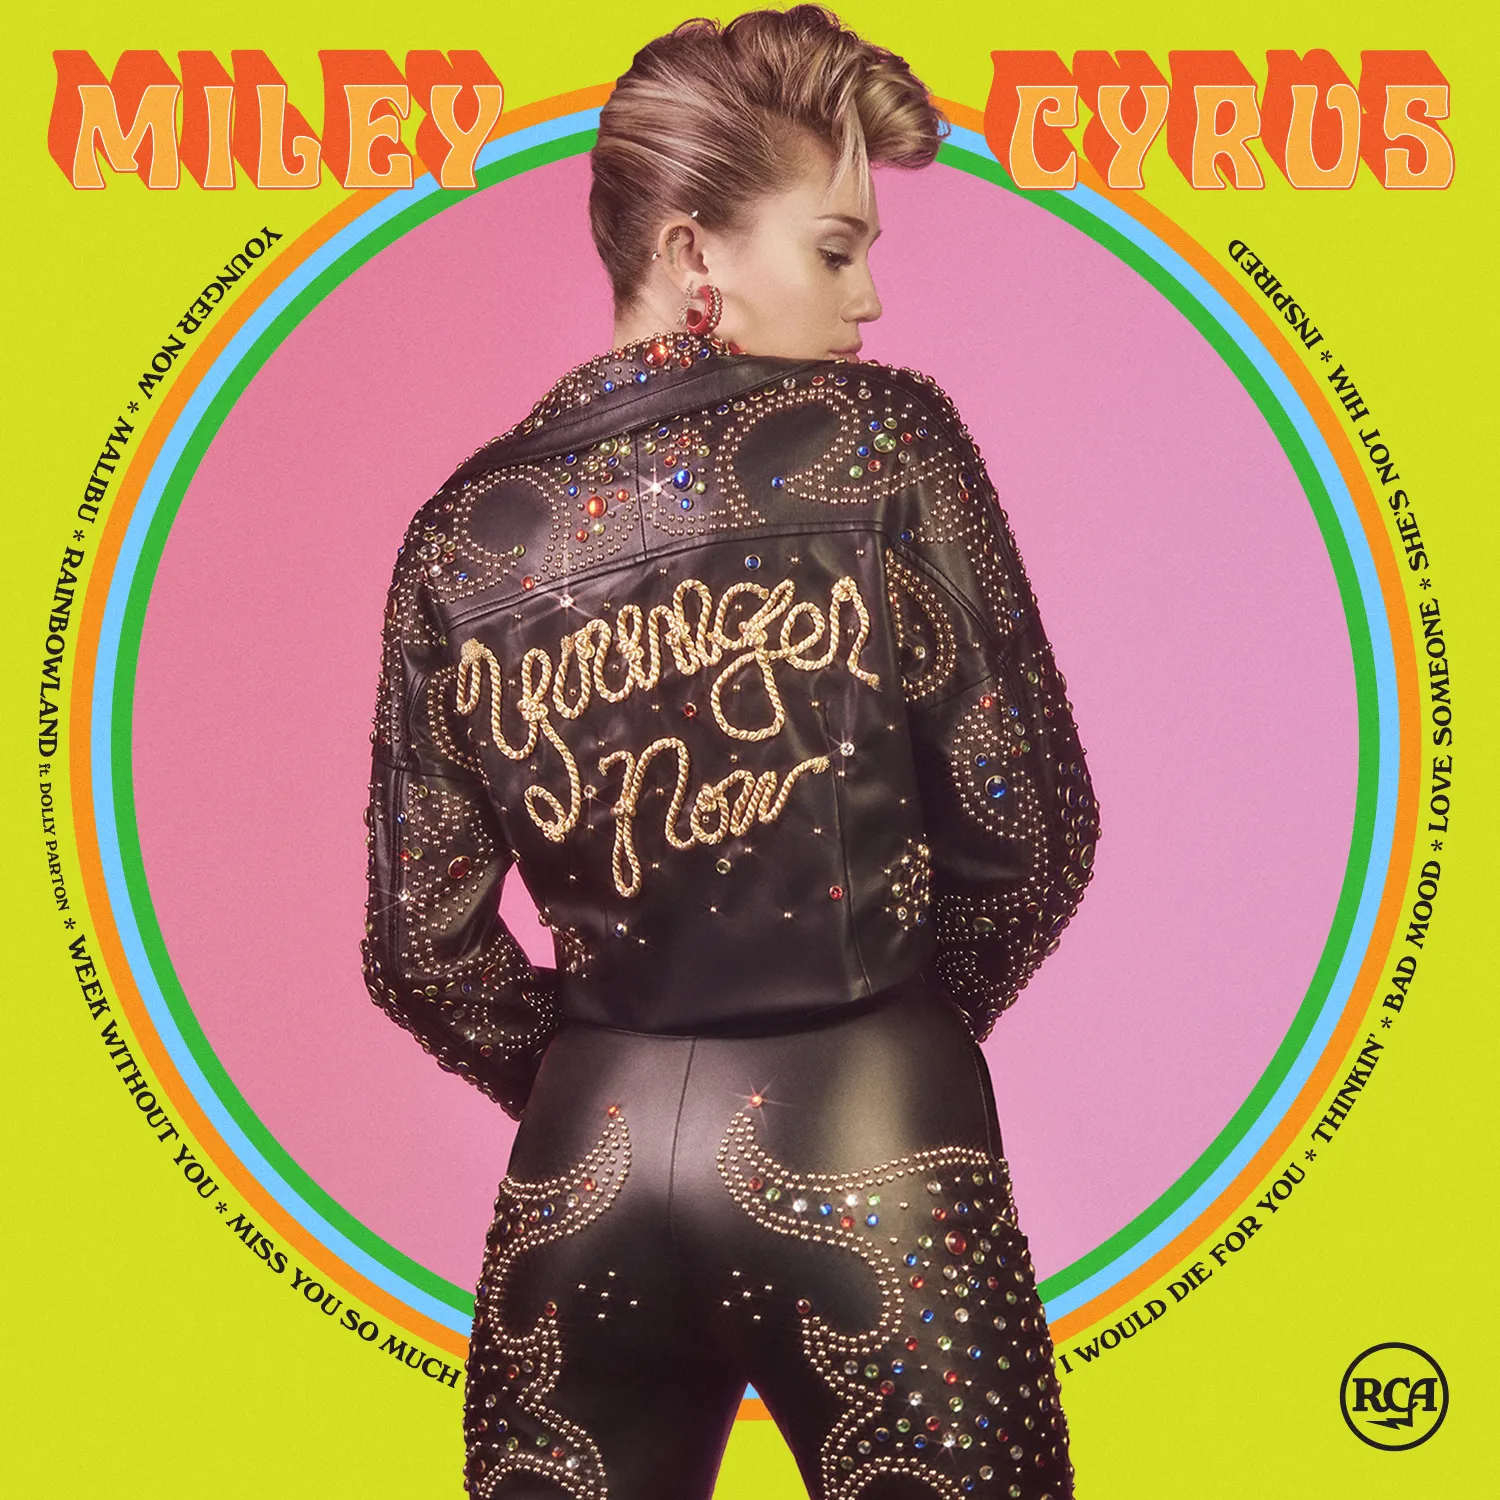 Miley Cyrus - Younger Now artwork